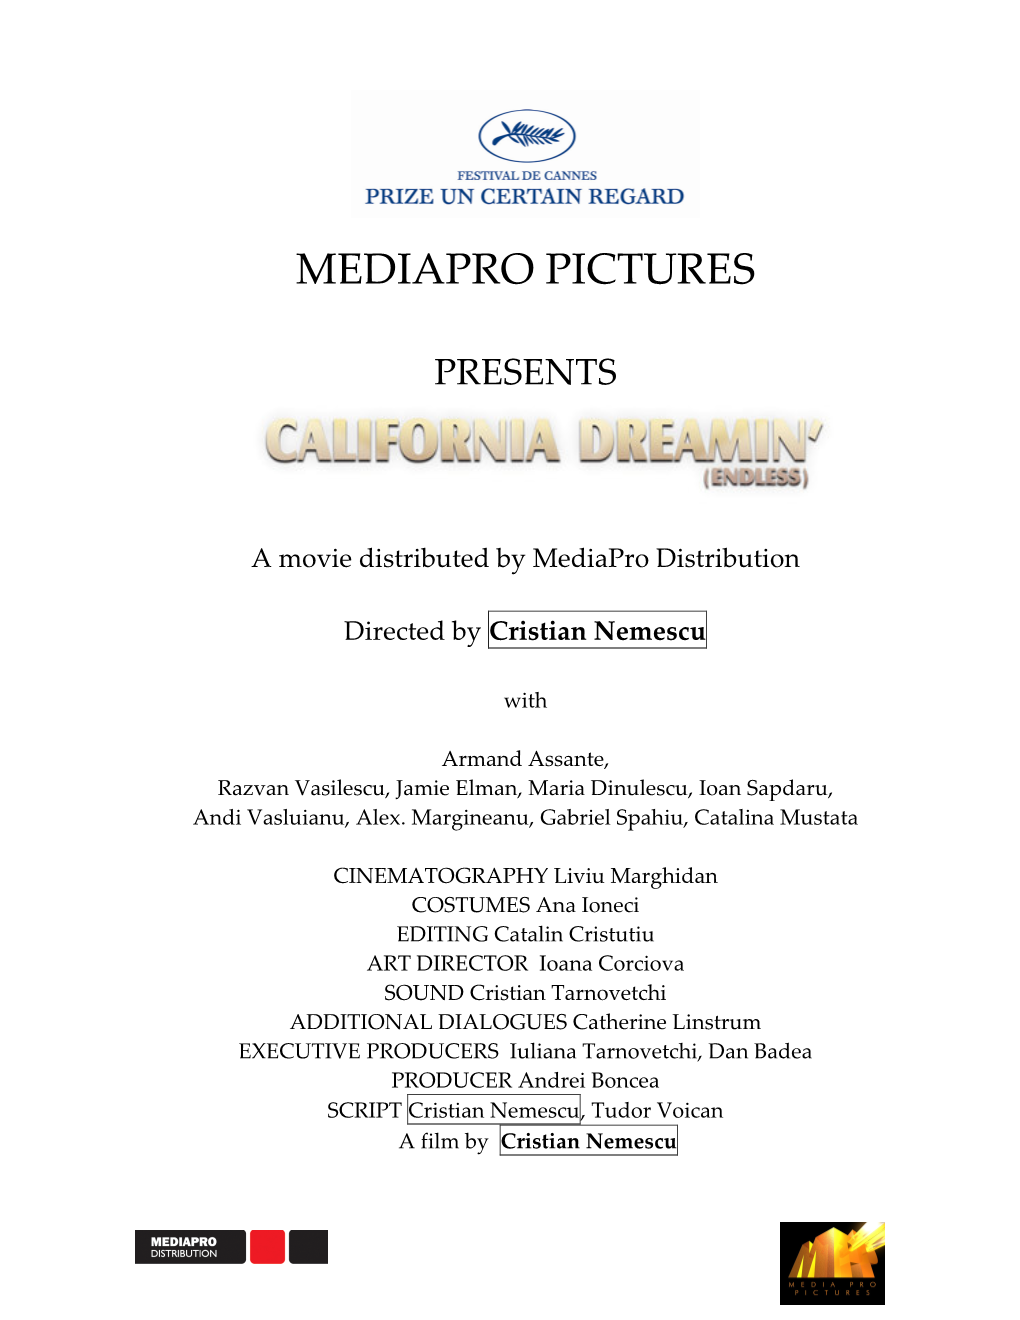 Mediapro Pictures